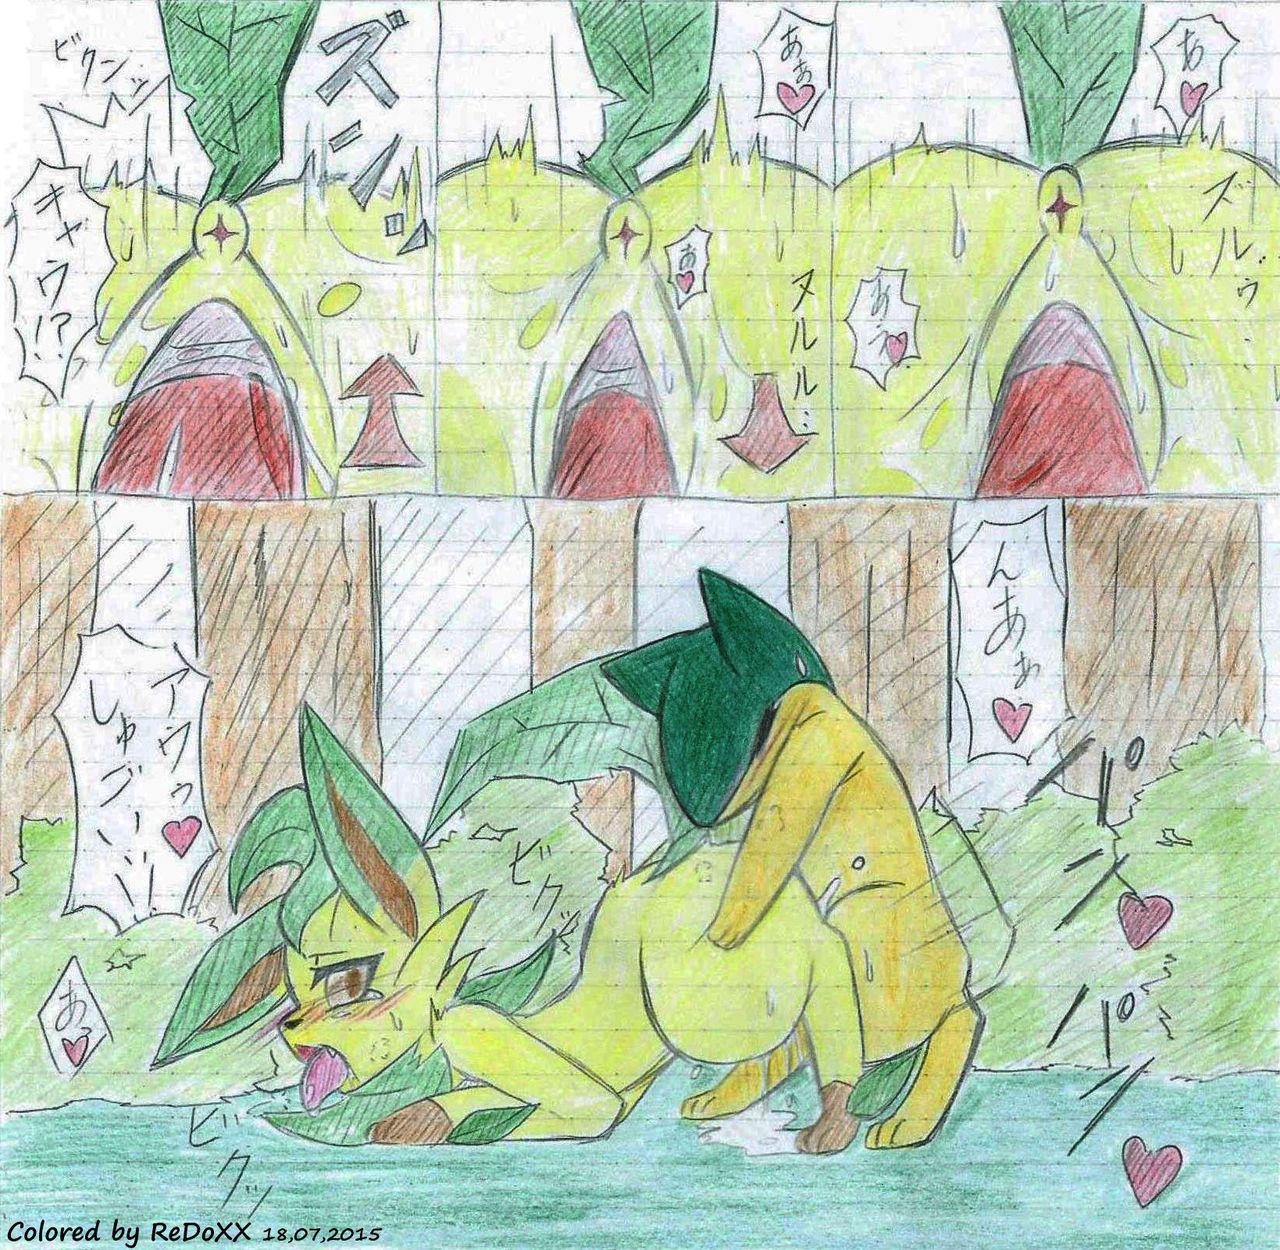 Leafeon X Quilava [Colorized by ReDoXX] 9